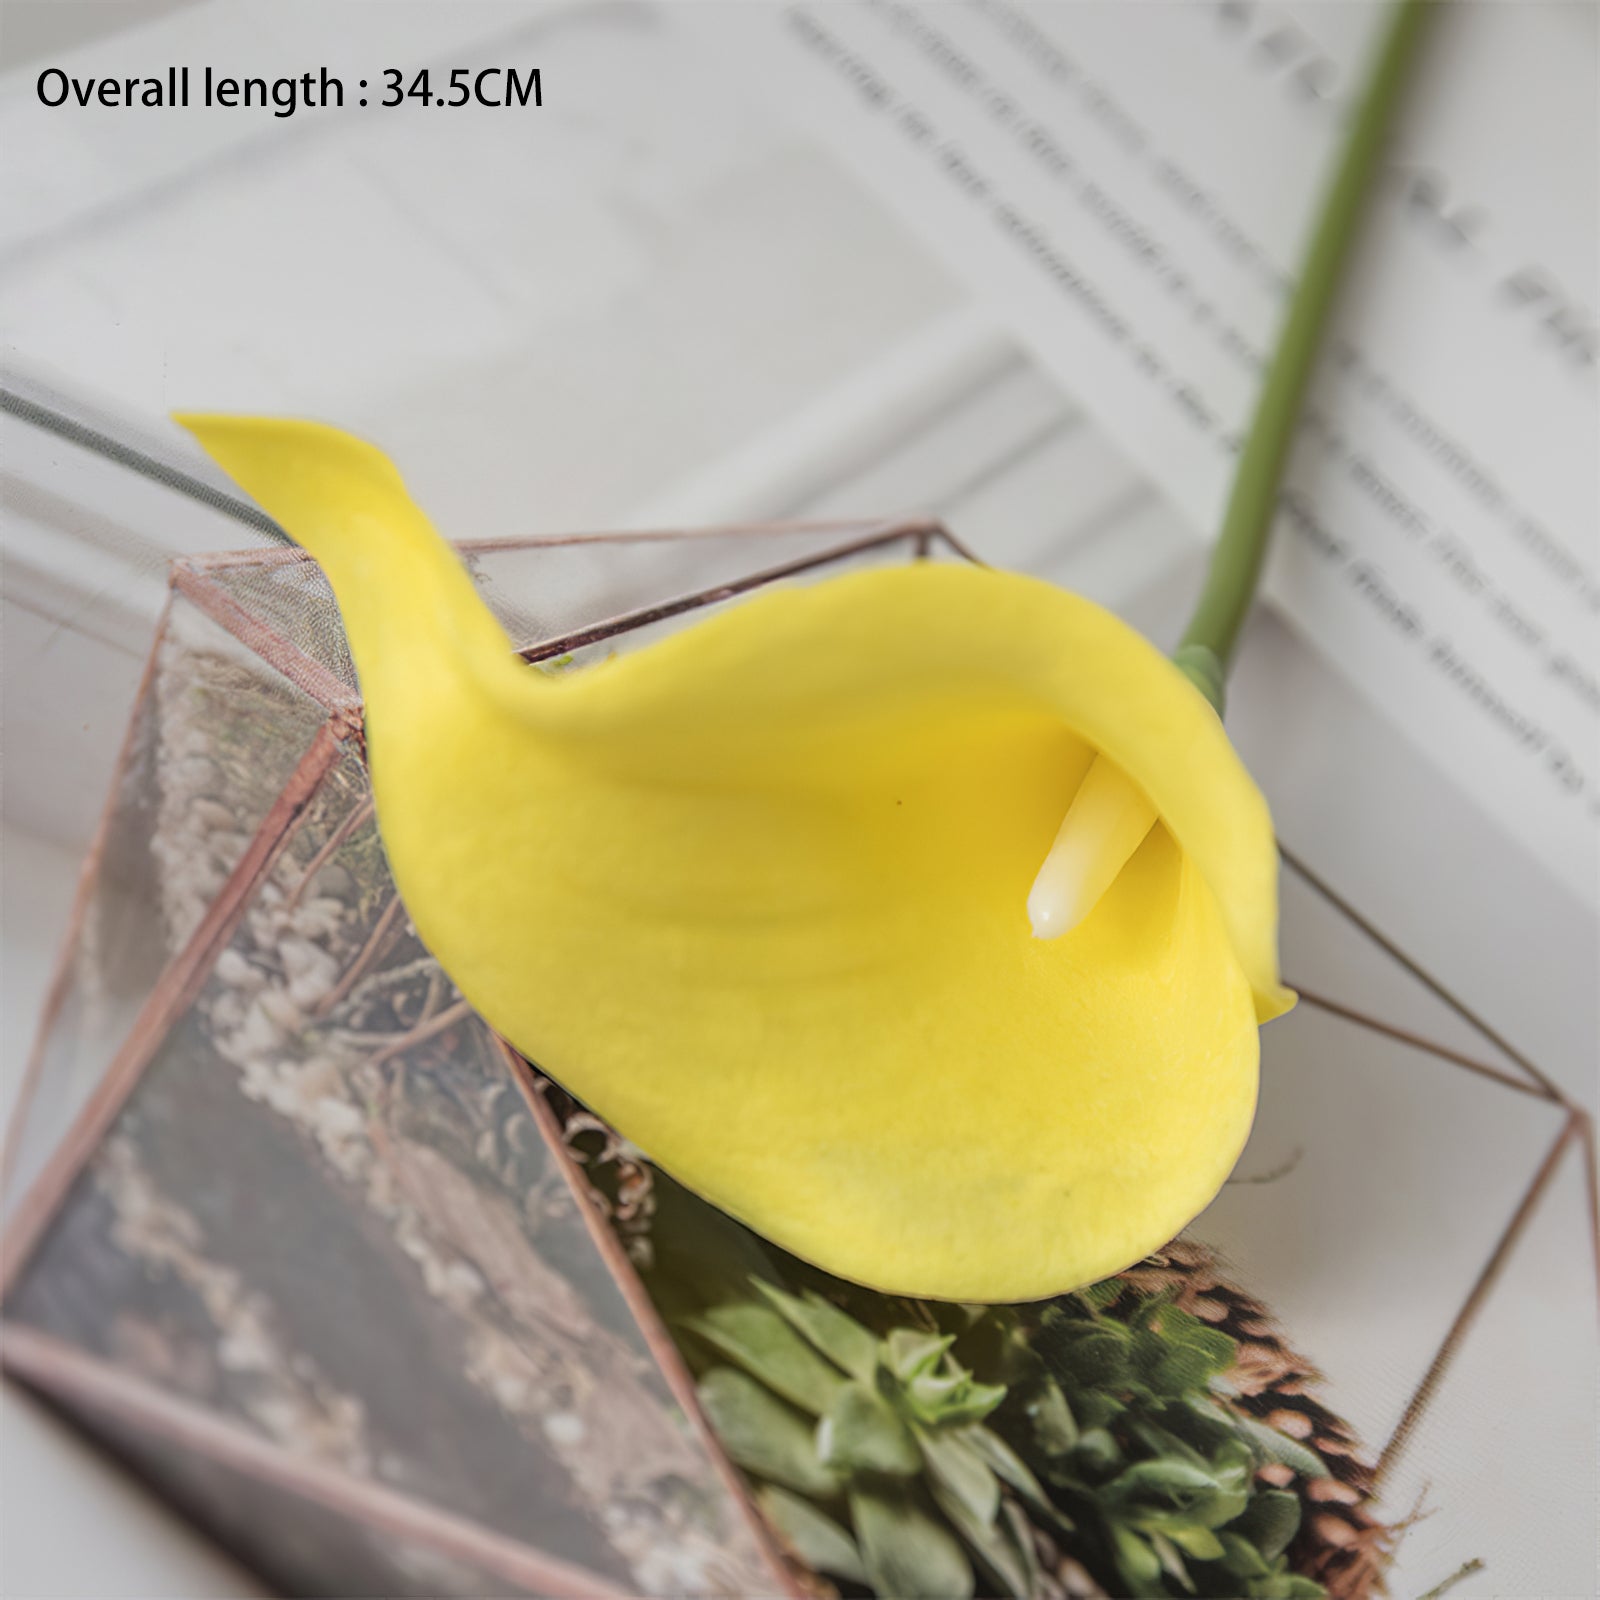 10pcs of Mini Calla Lily Series for Wedding Party Home Decor